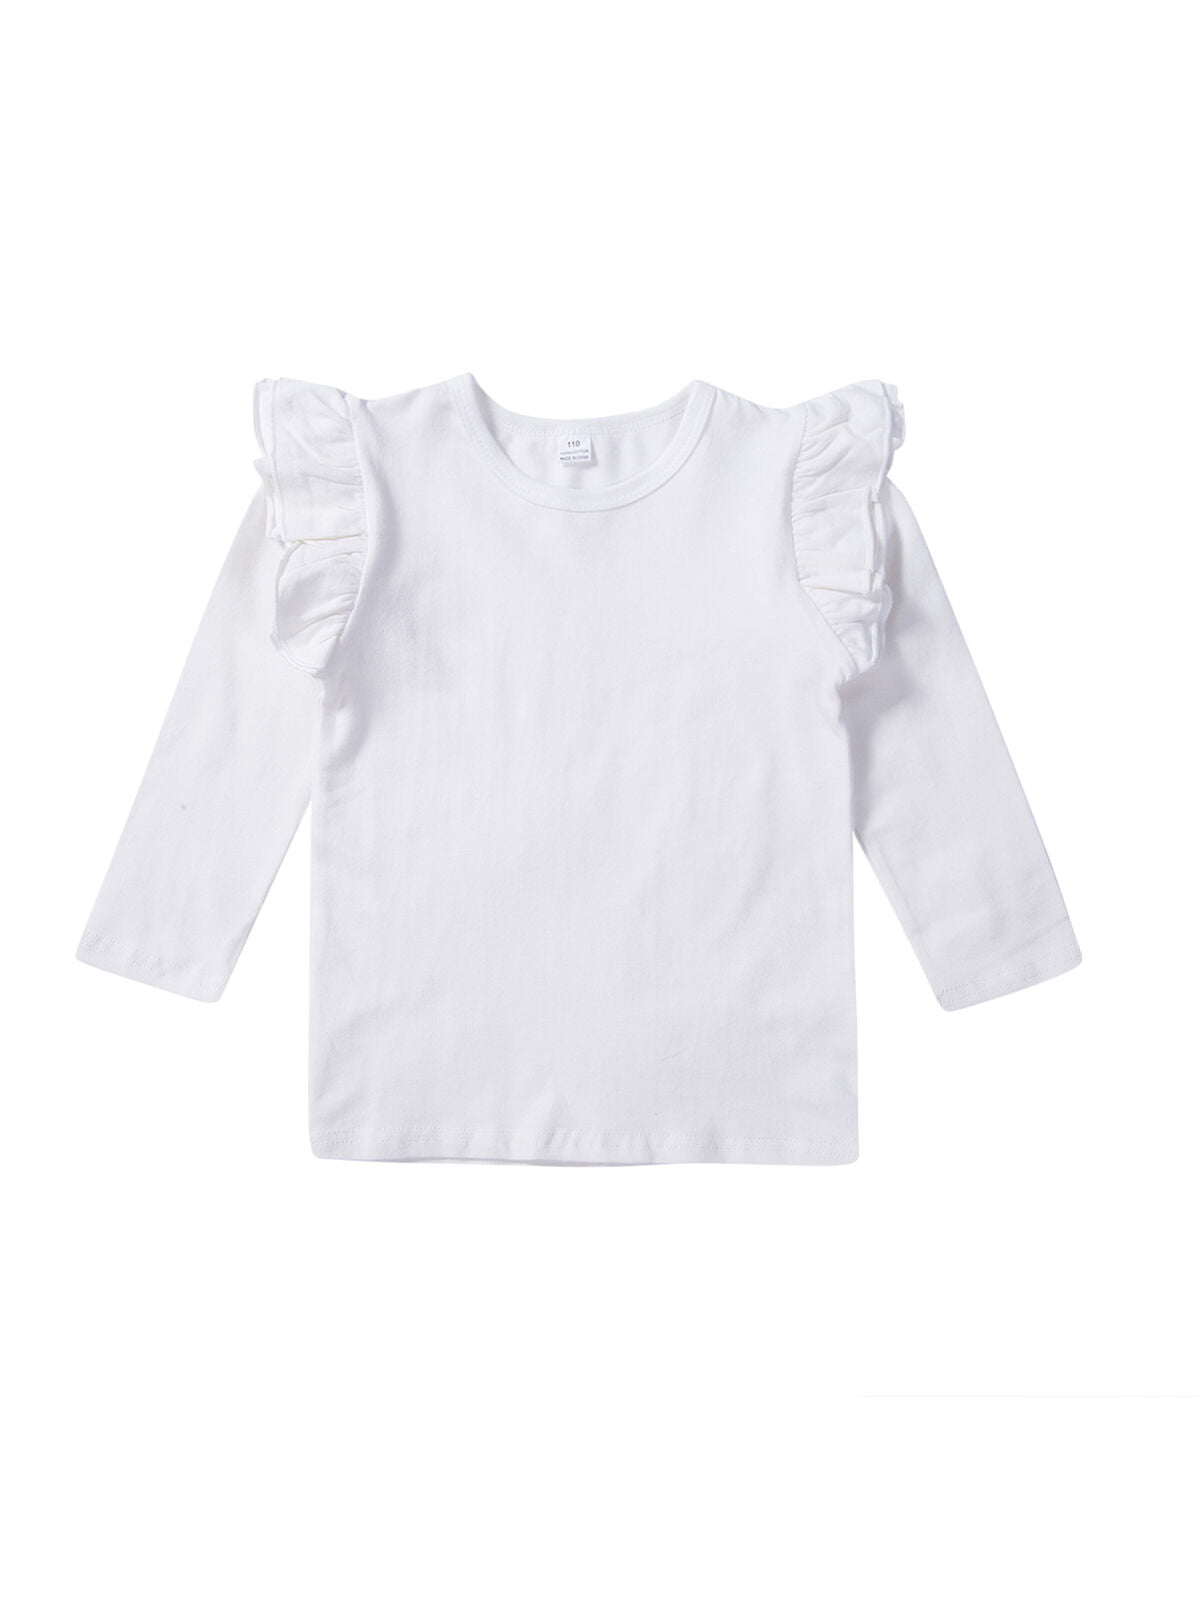 Kids Girls Toddlers Round Neck Tops Casual Ruffle Solid Half Sleeve Shirt Blouse 